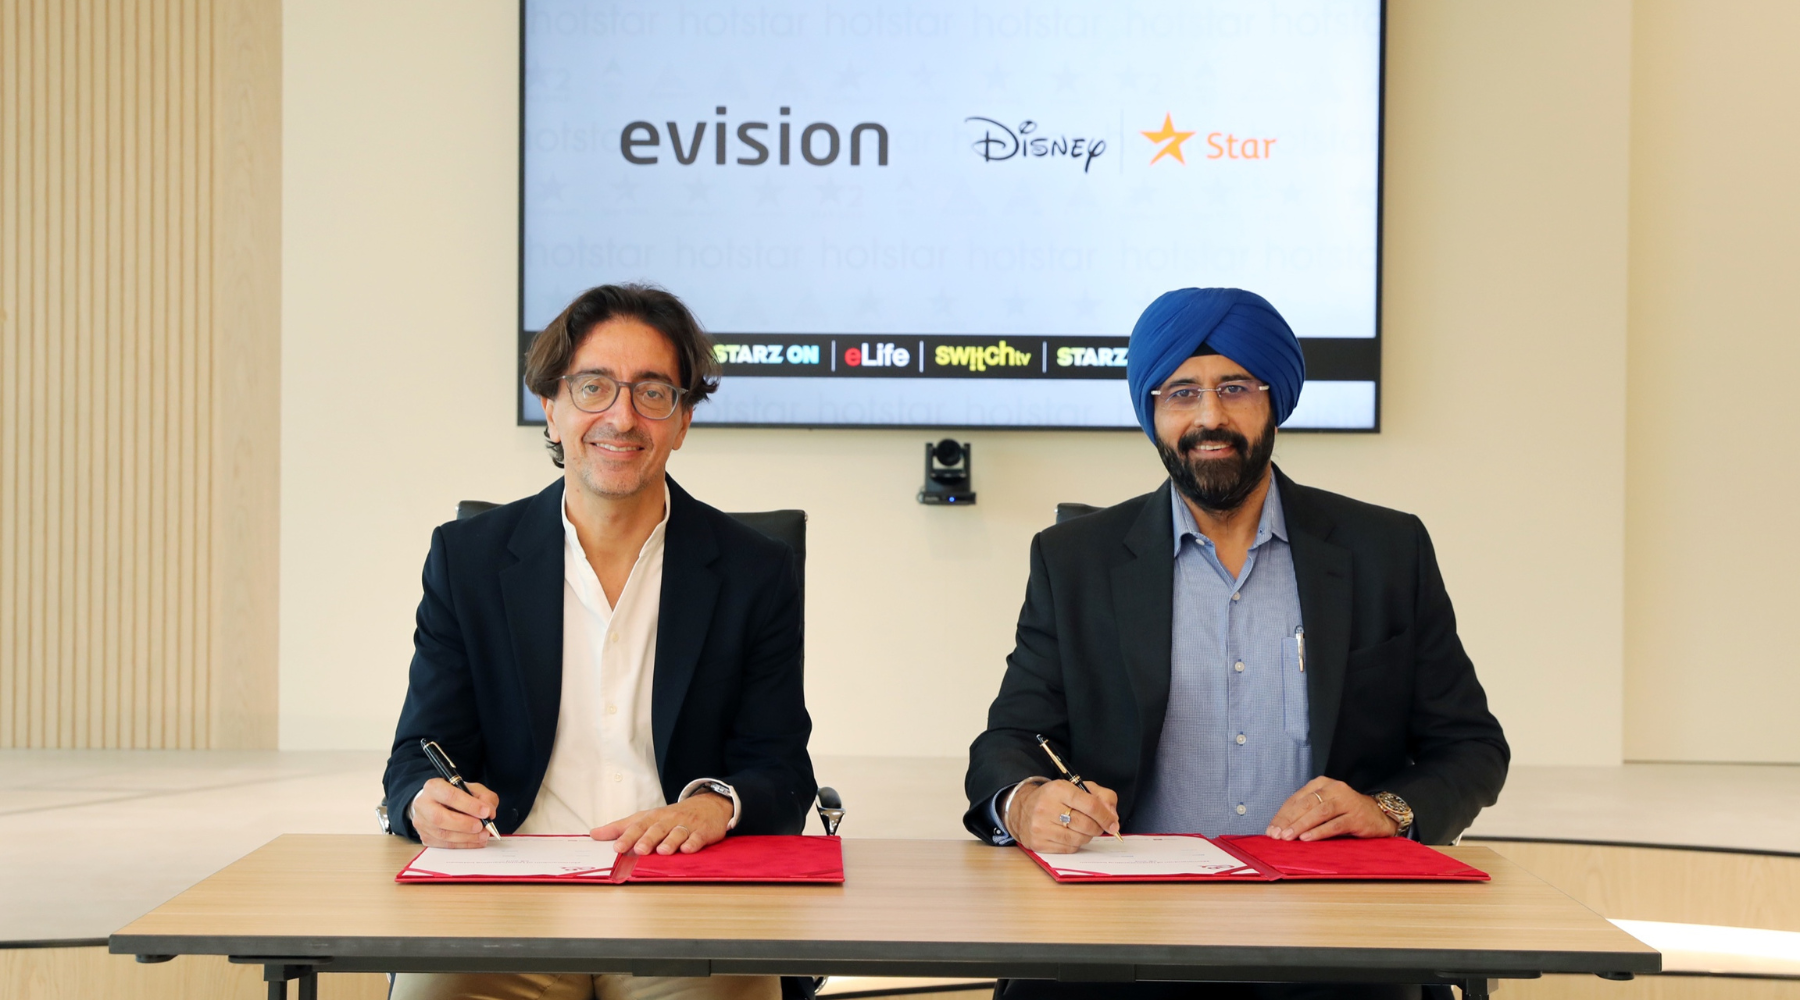 evision and Disney Star Expand Collaboration